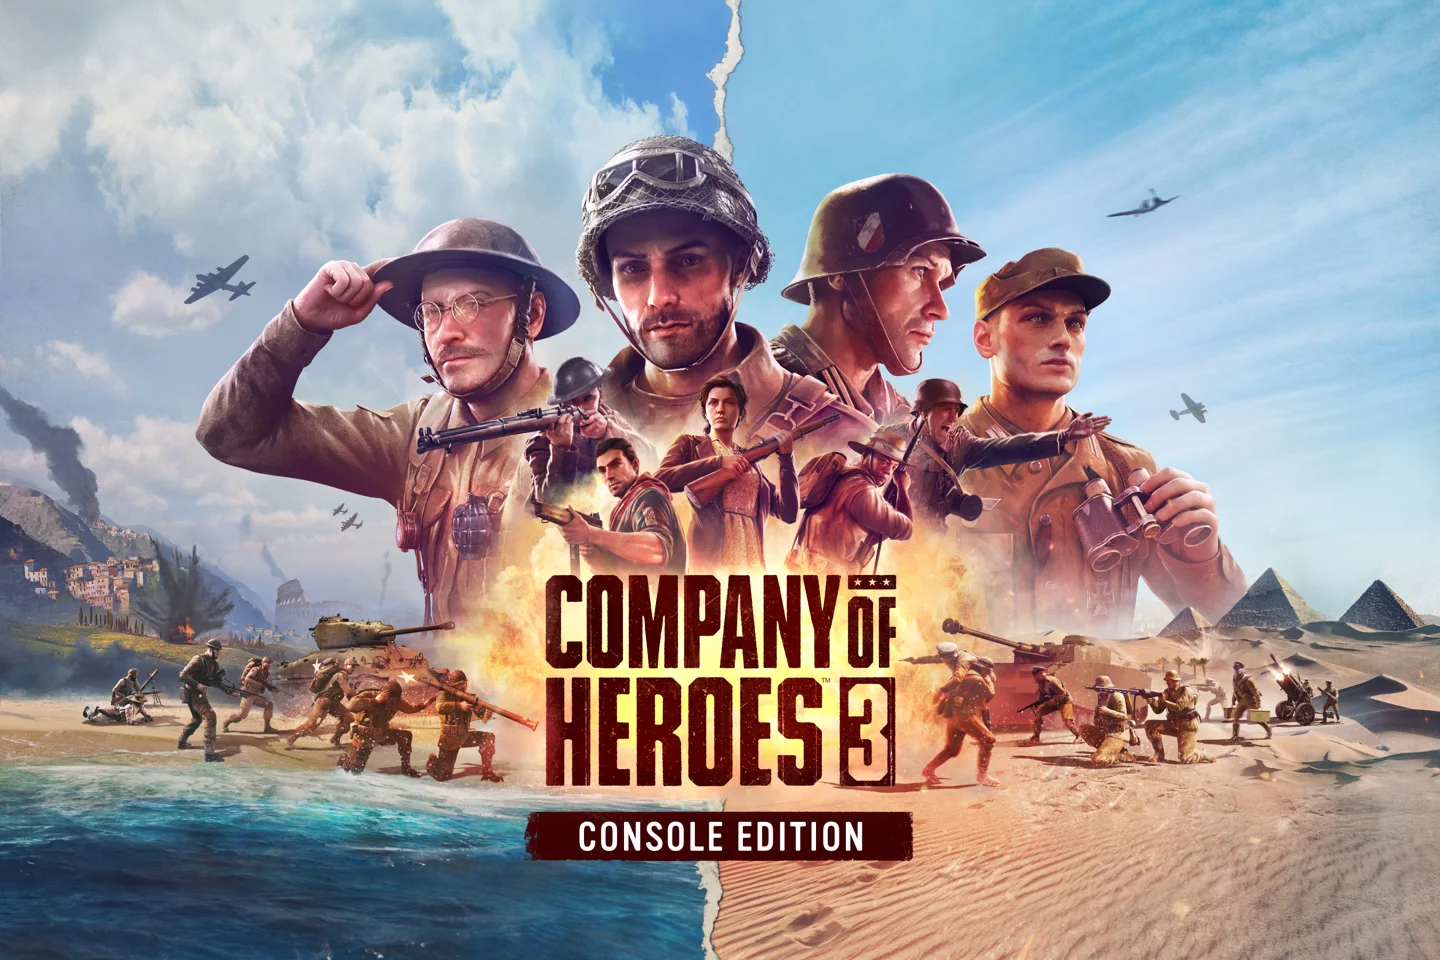 Company of Heroes 3 is coming to PlayStation and Xbox